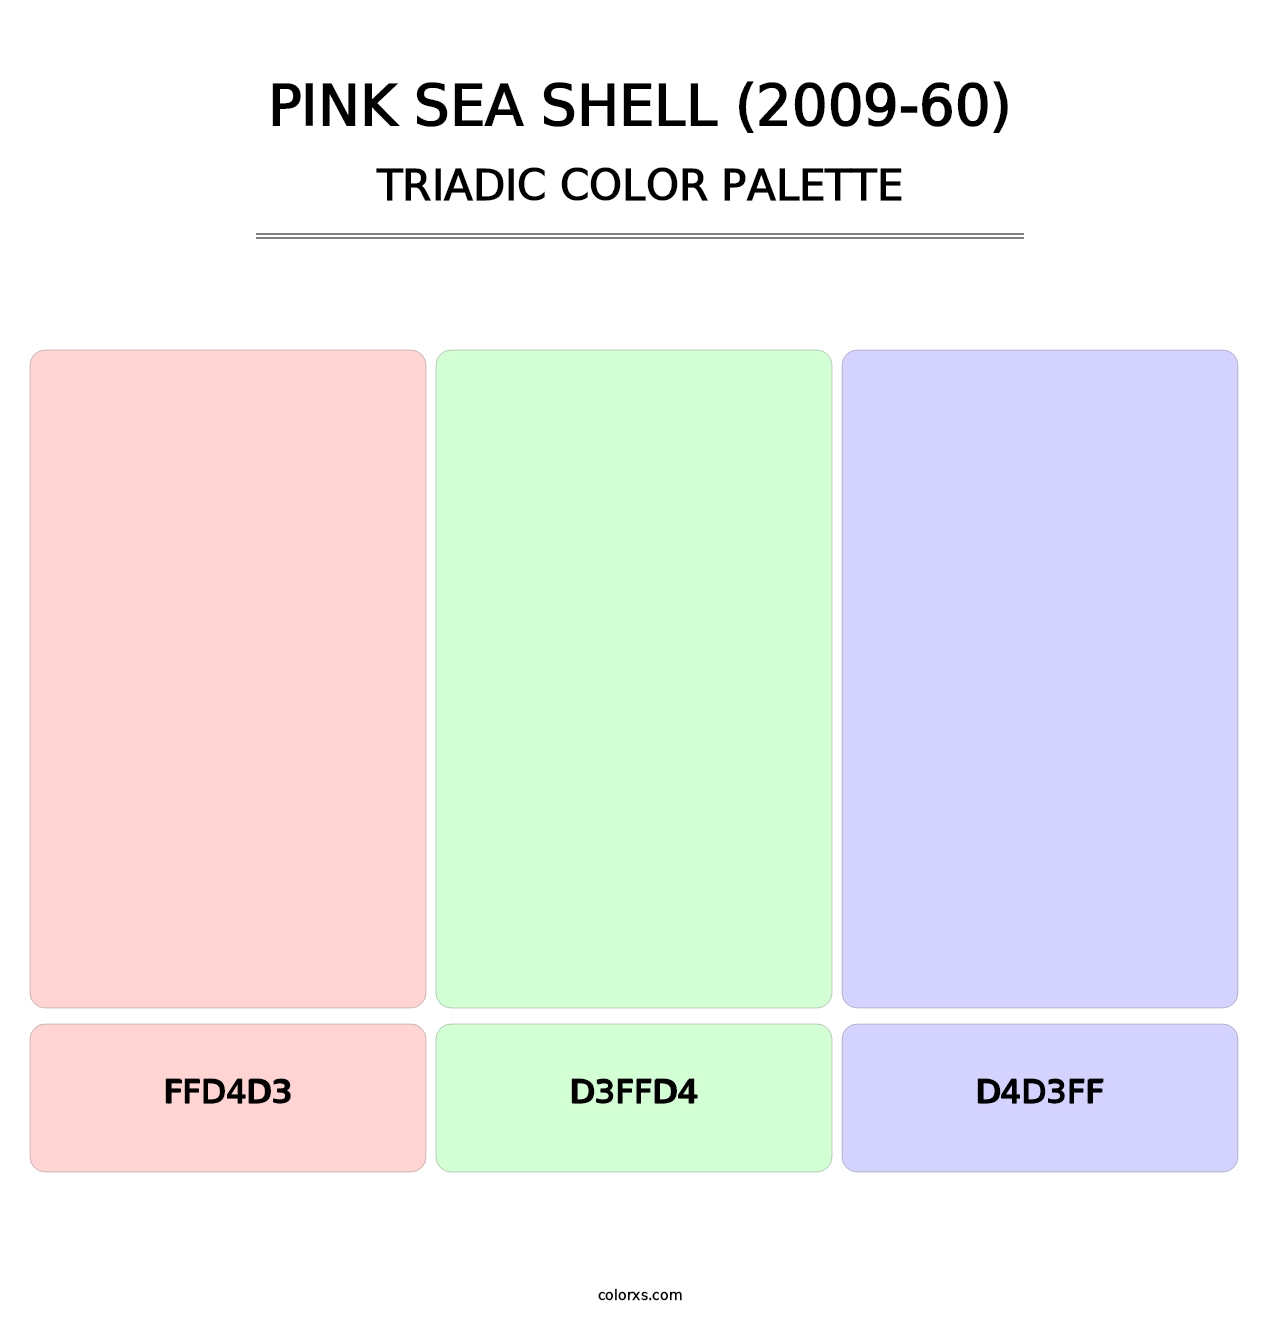 Pink Sea Shell (2009-60) - Triadic Color Palette